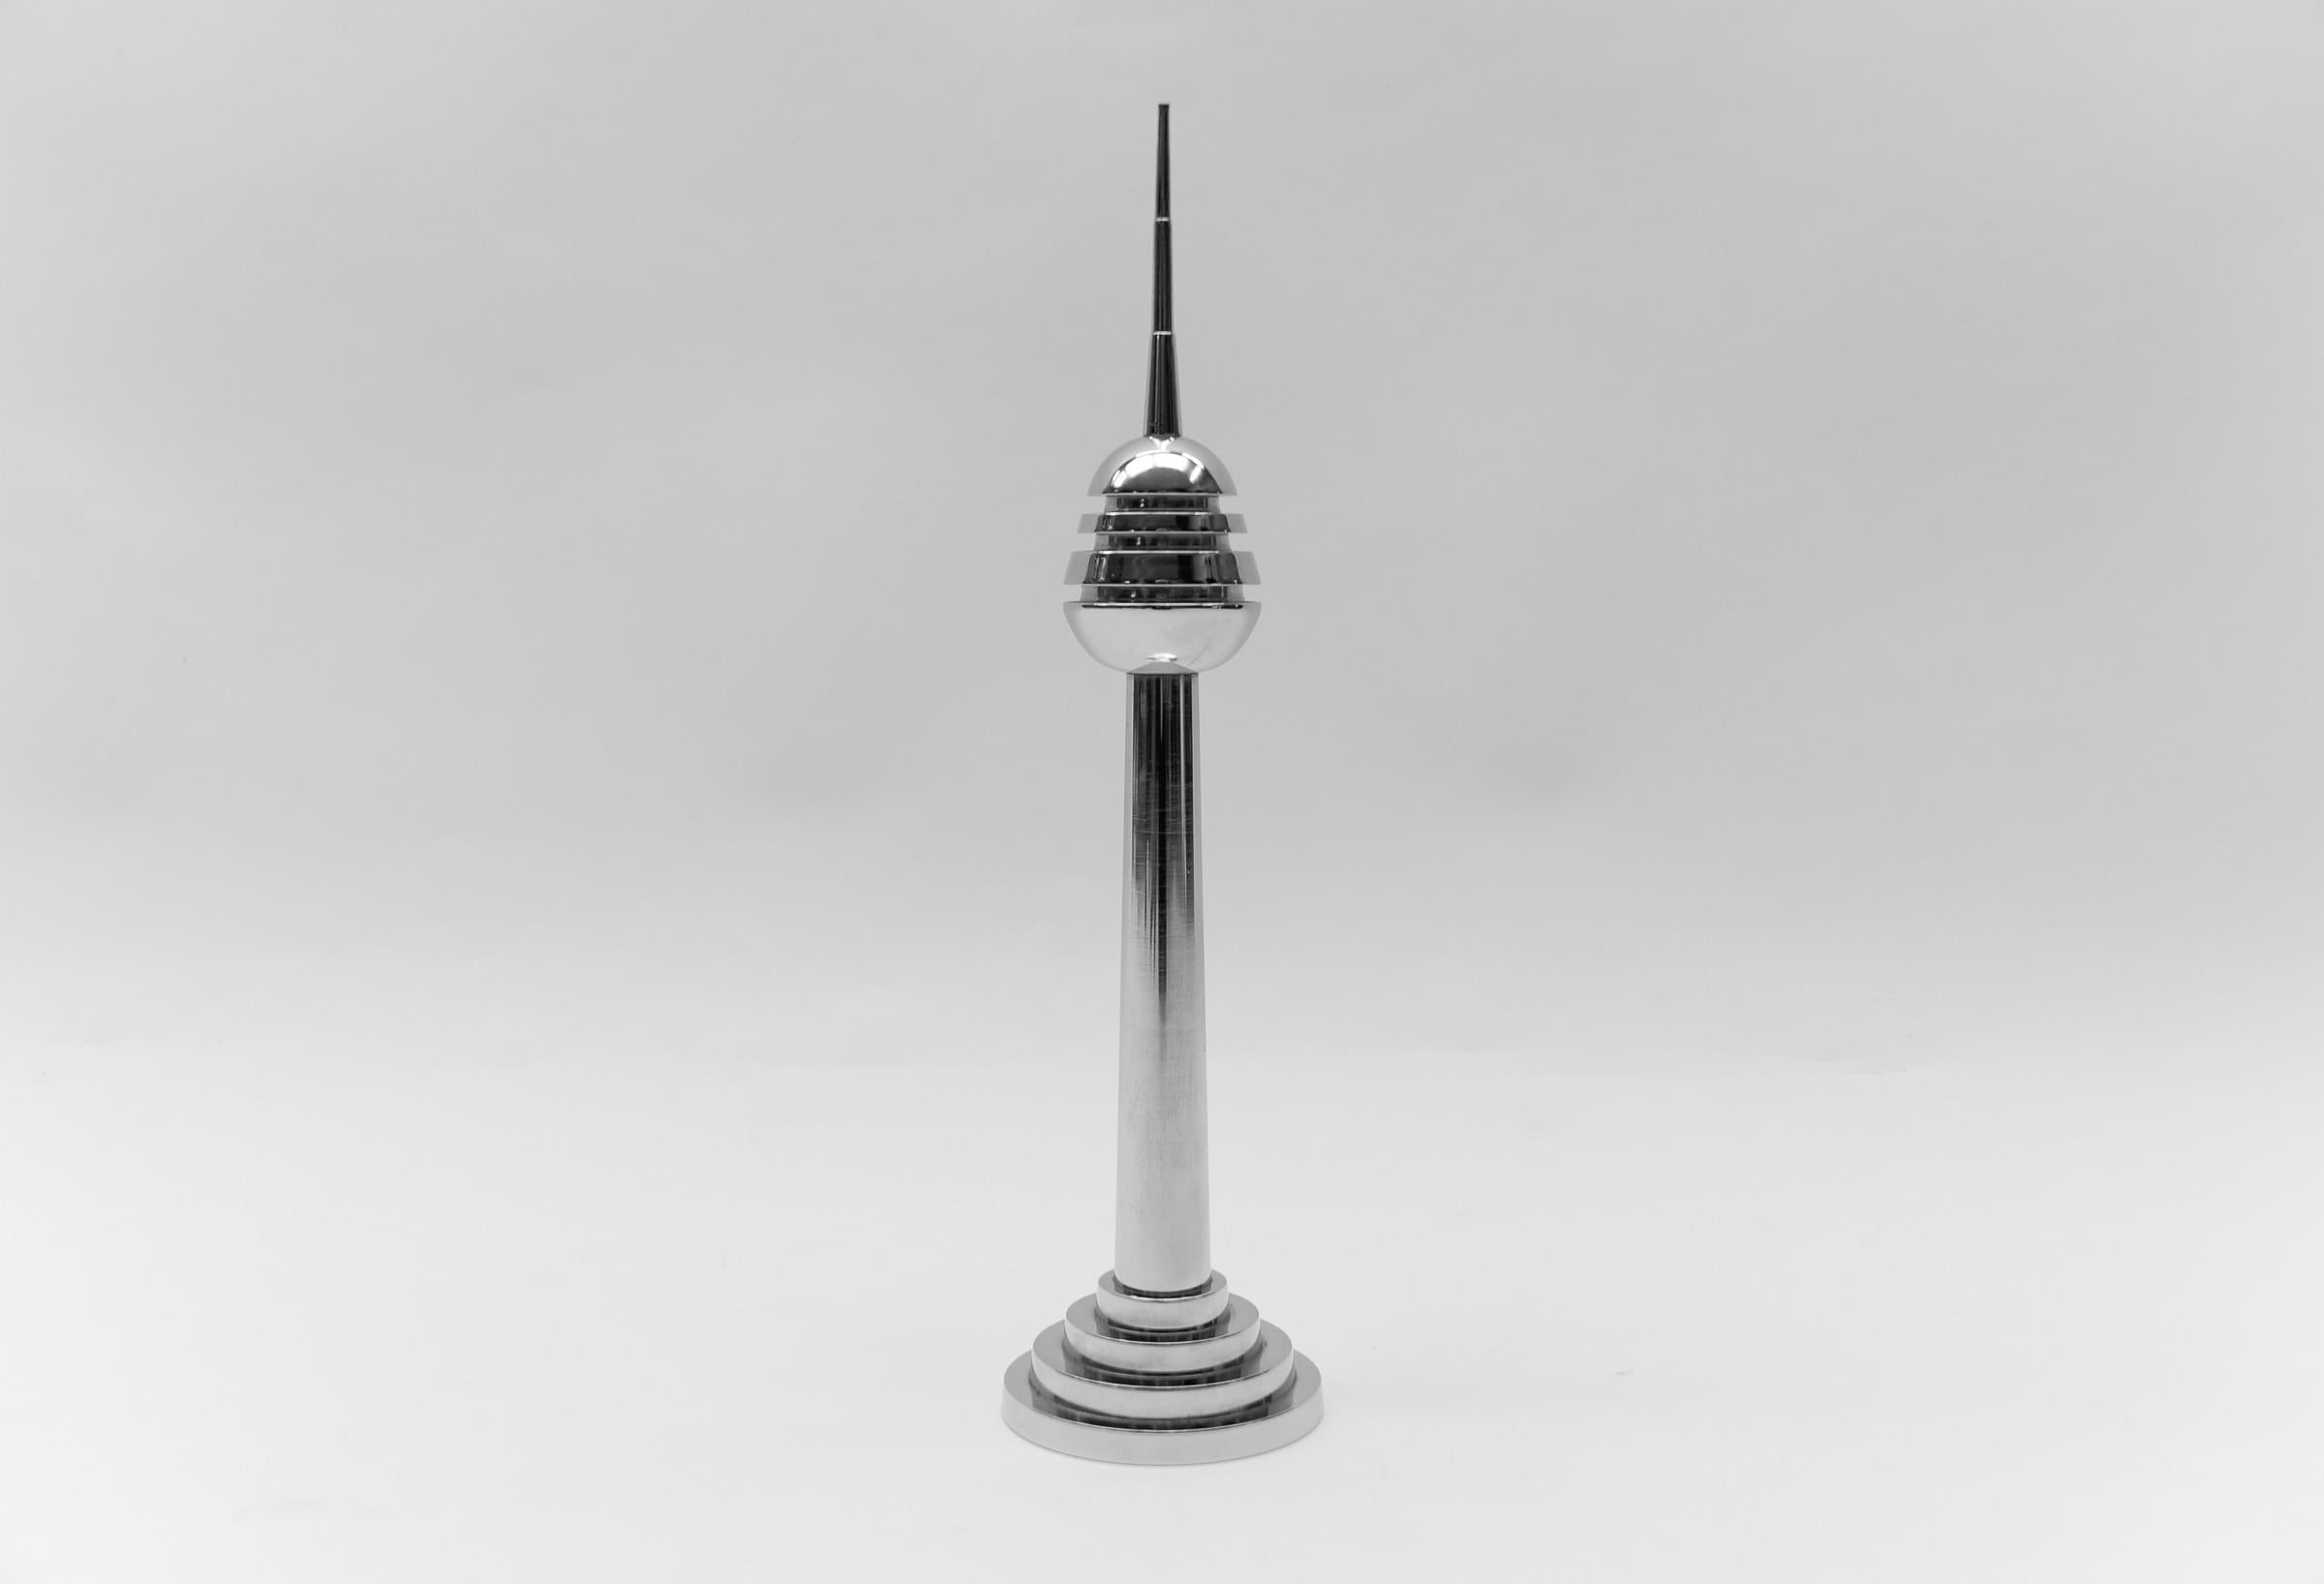 Metal Large and Heavy Mid-Century Modern Tv-Tower Sculpture, 1970s For Sale